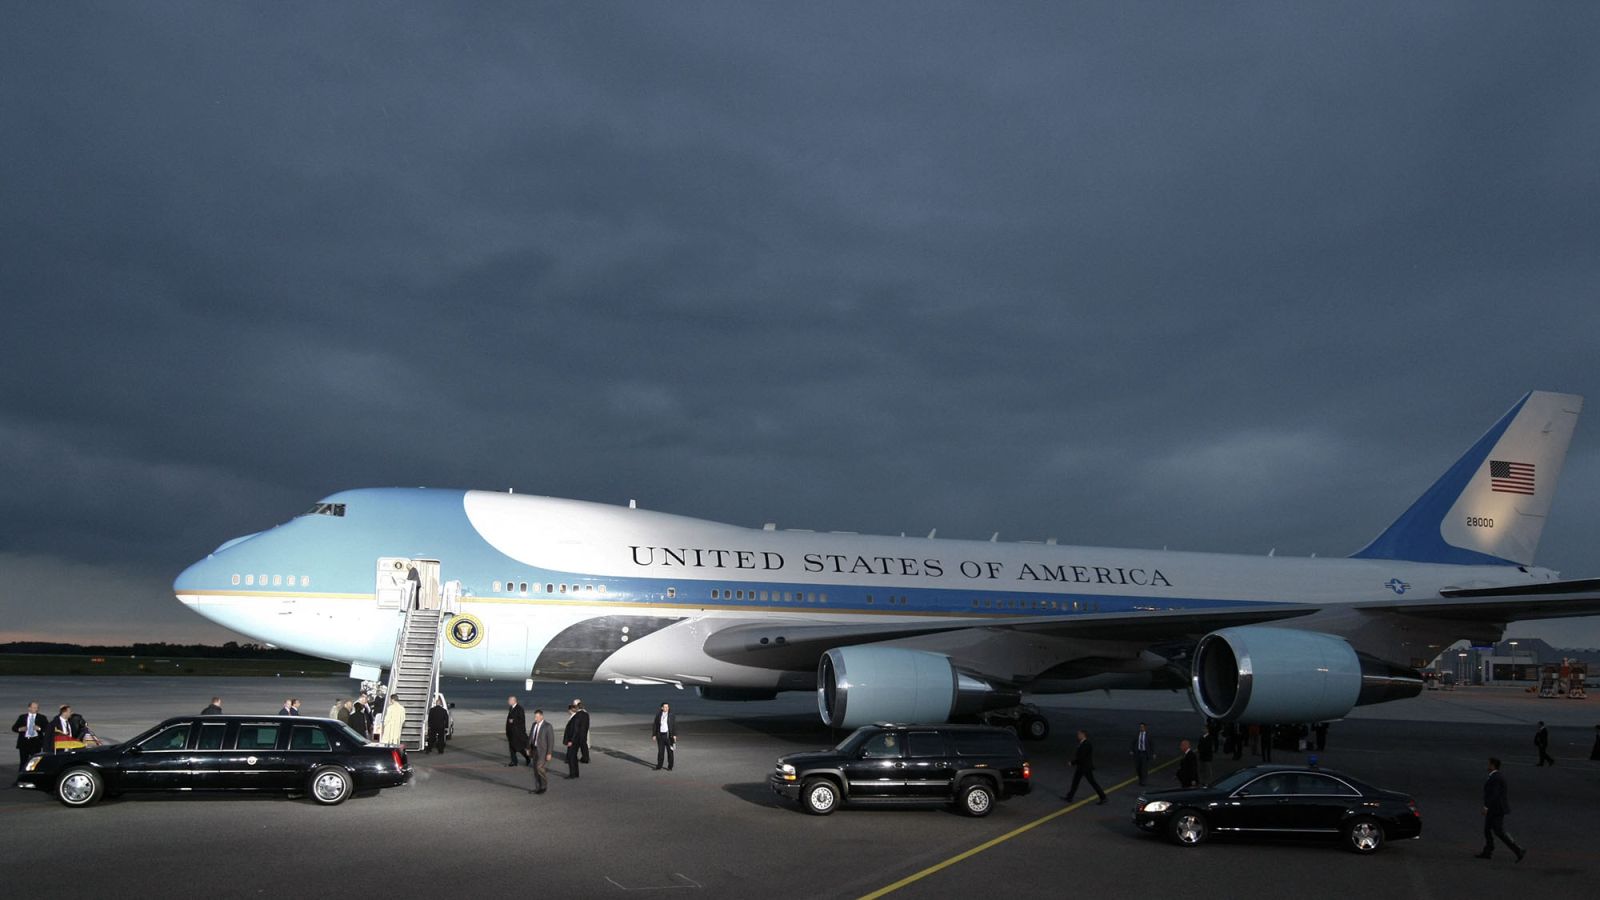 An updated Air Force One could withstand the electromagnetic pulse